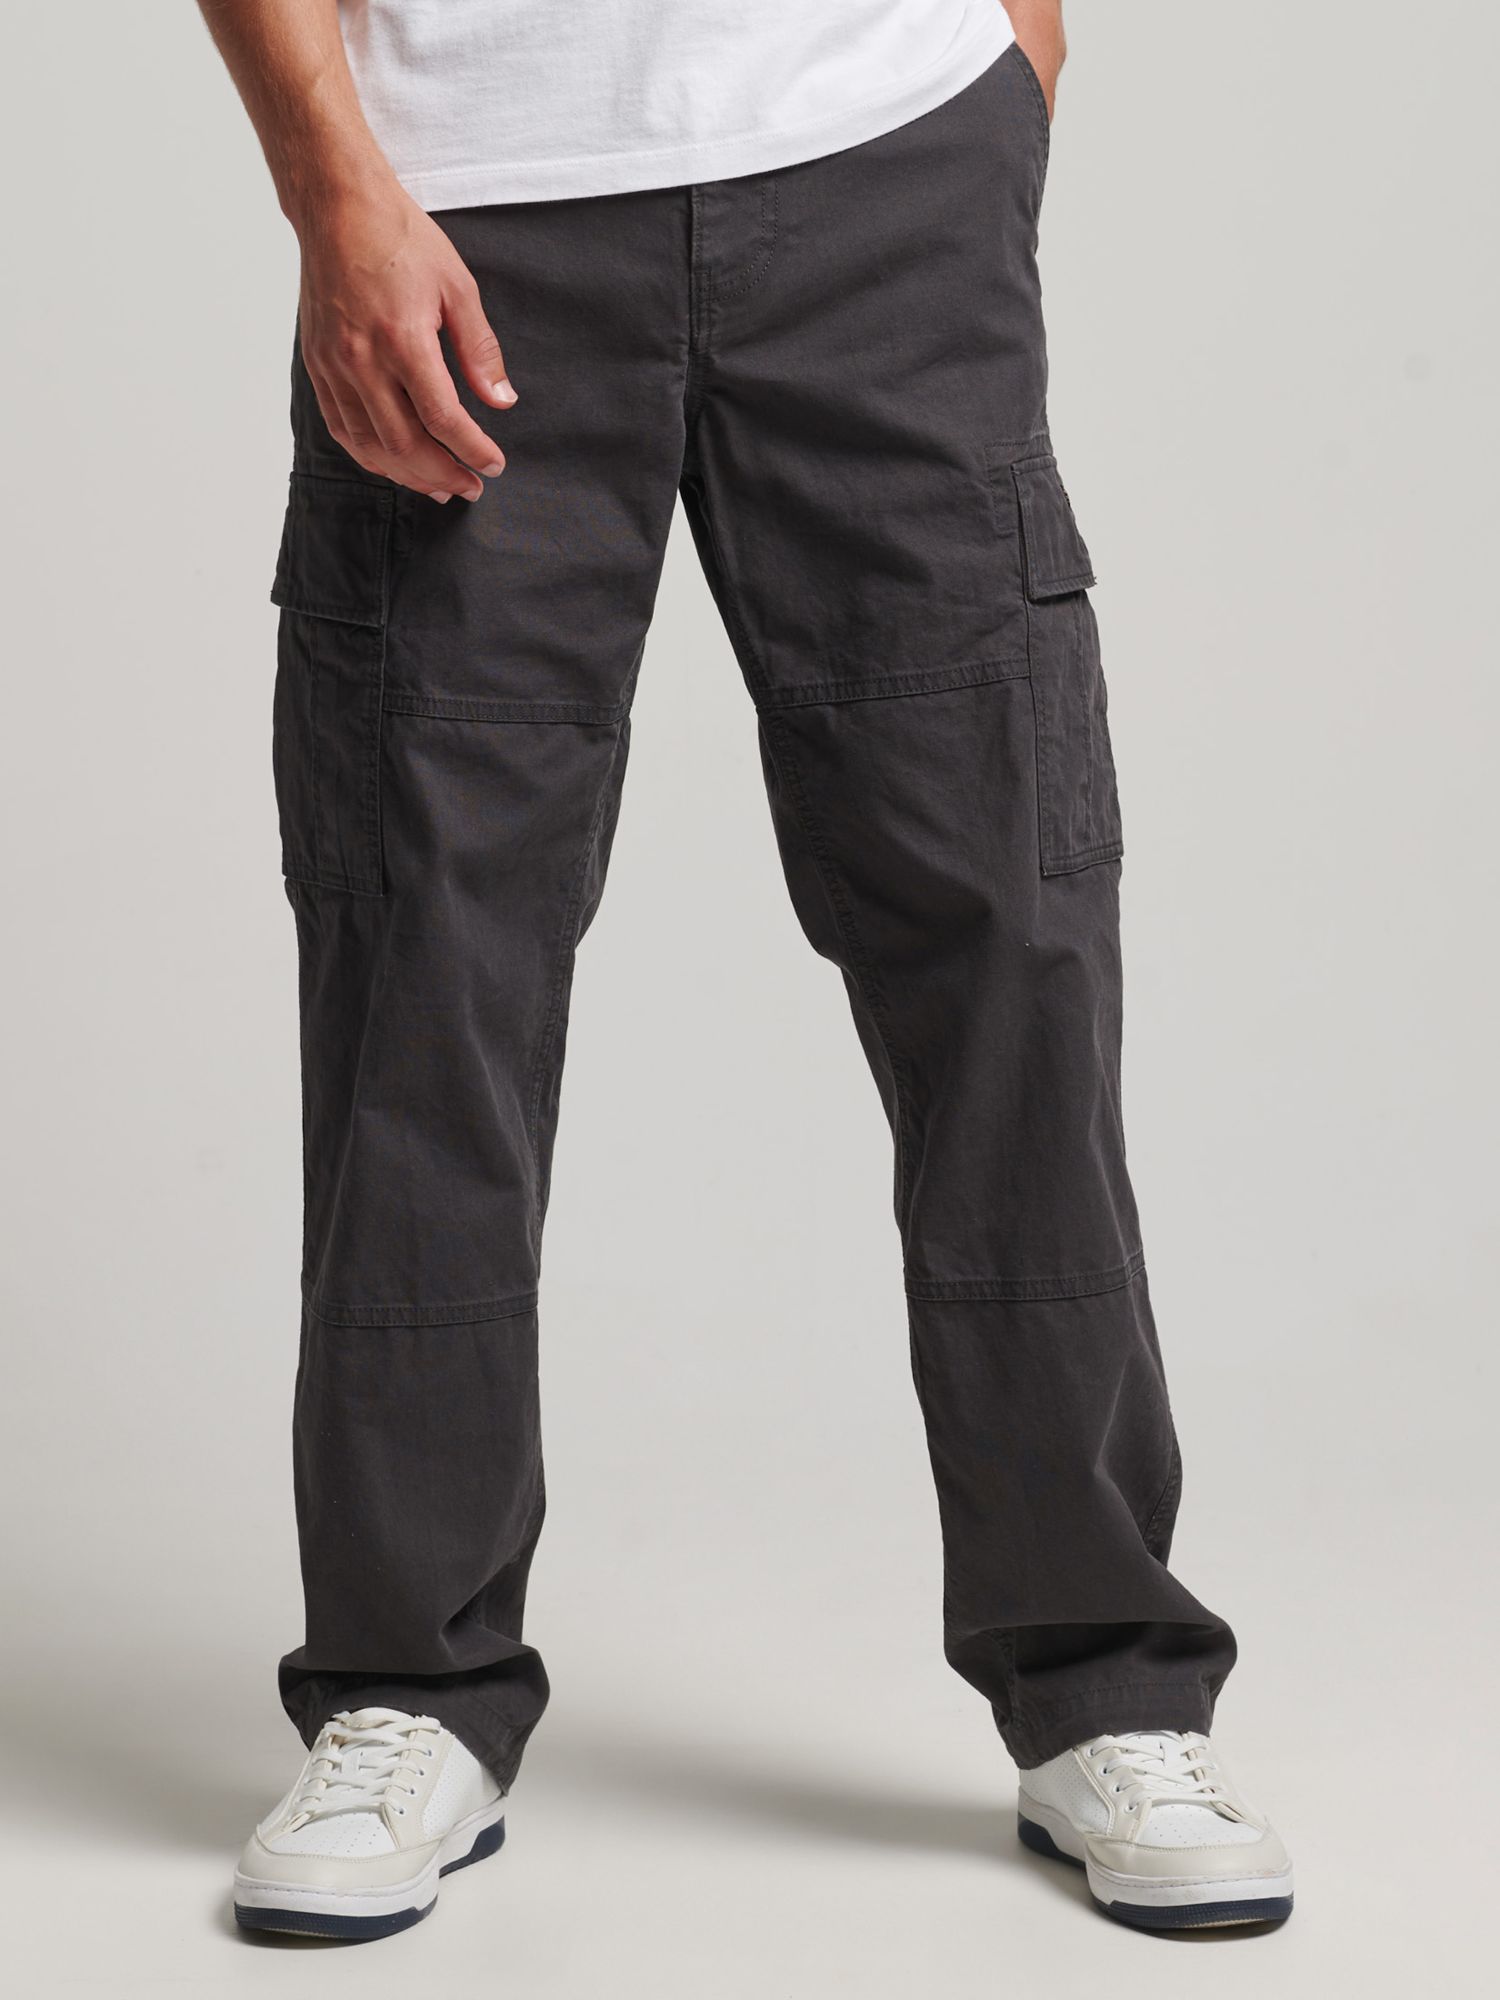 Mens - Organic Cotton Baggy Cargo Pants in Washed Black